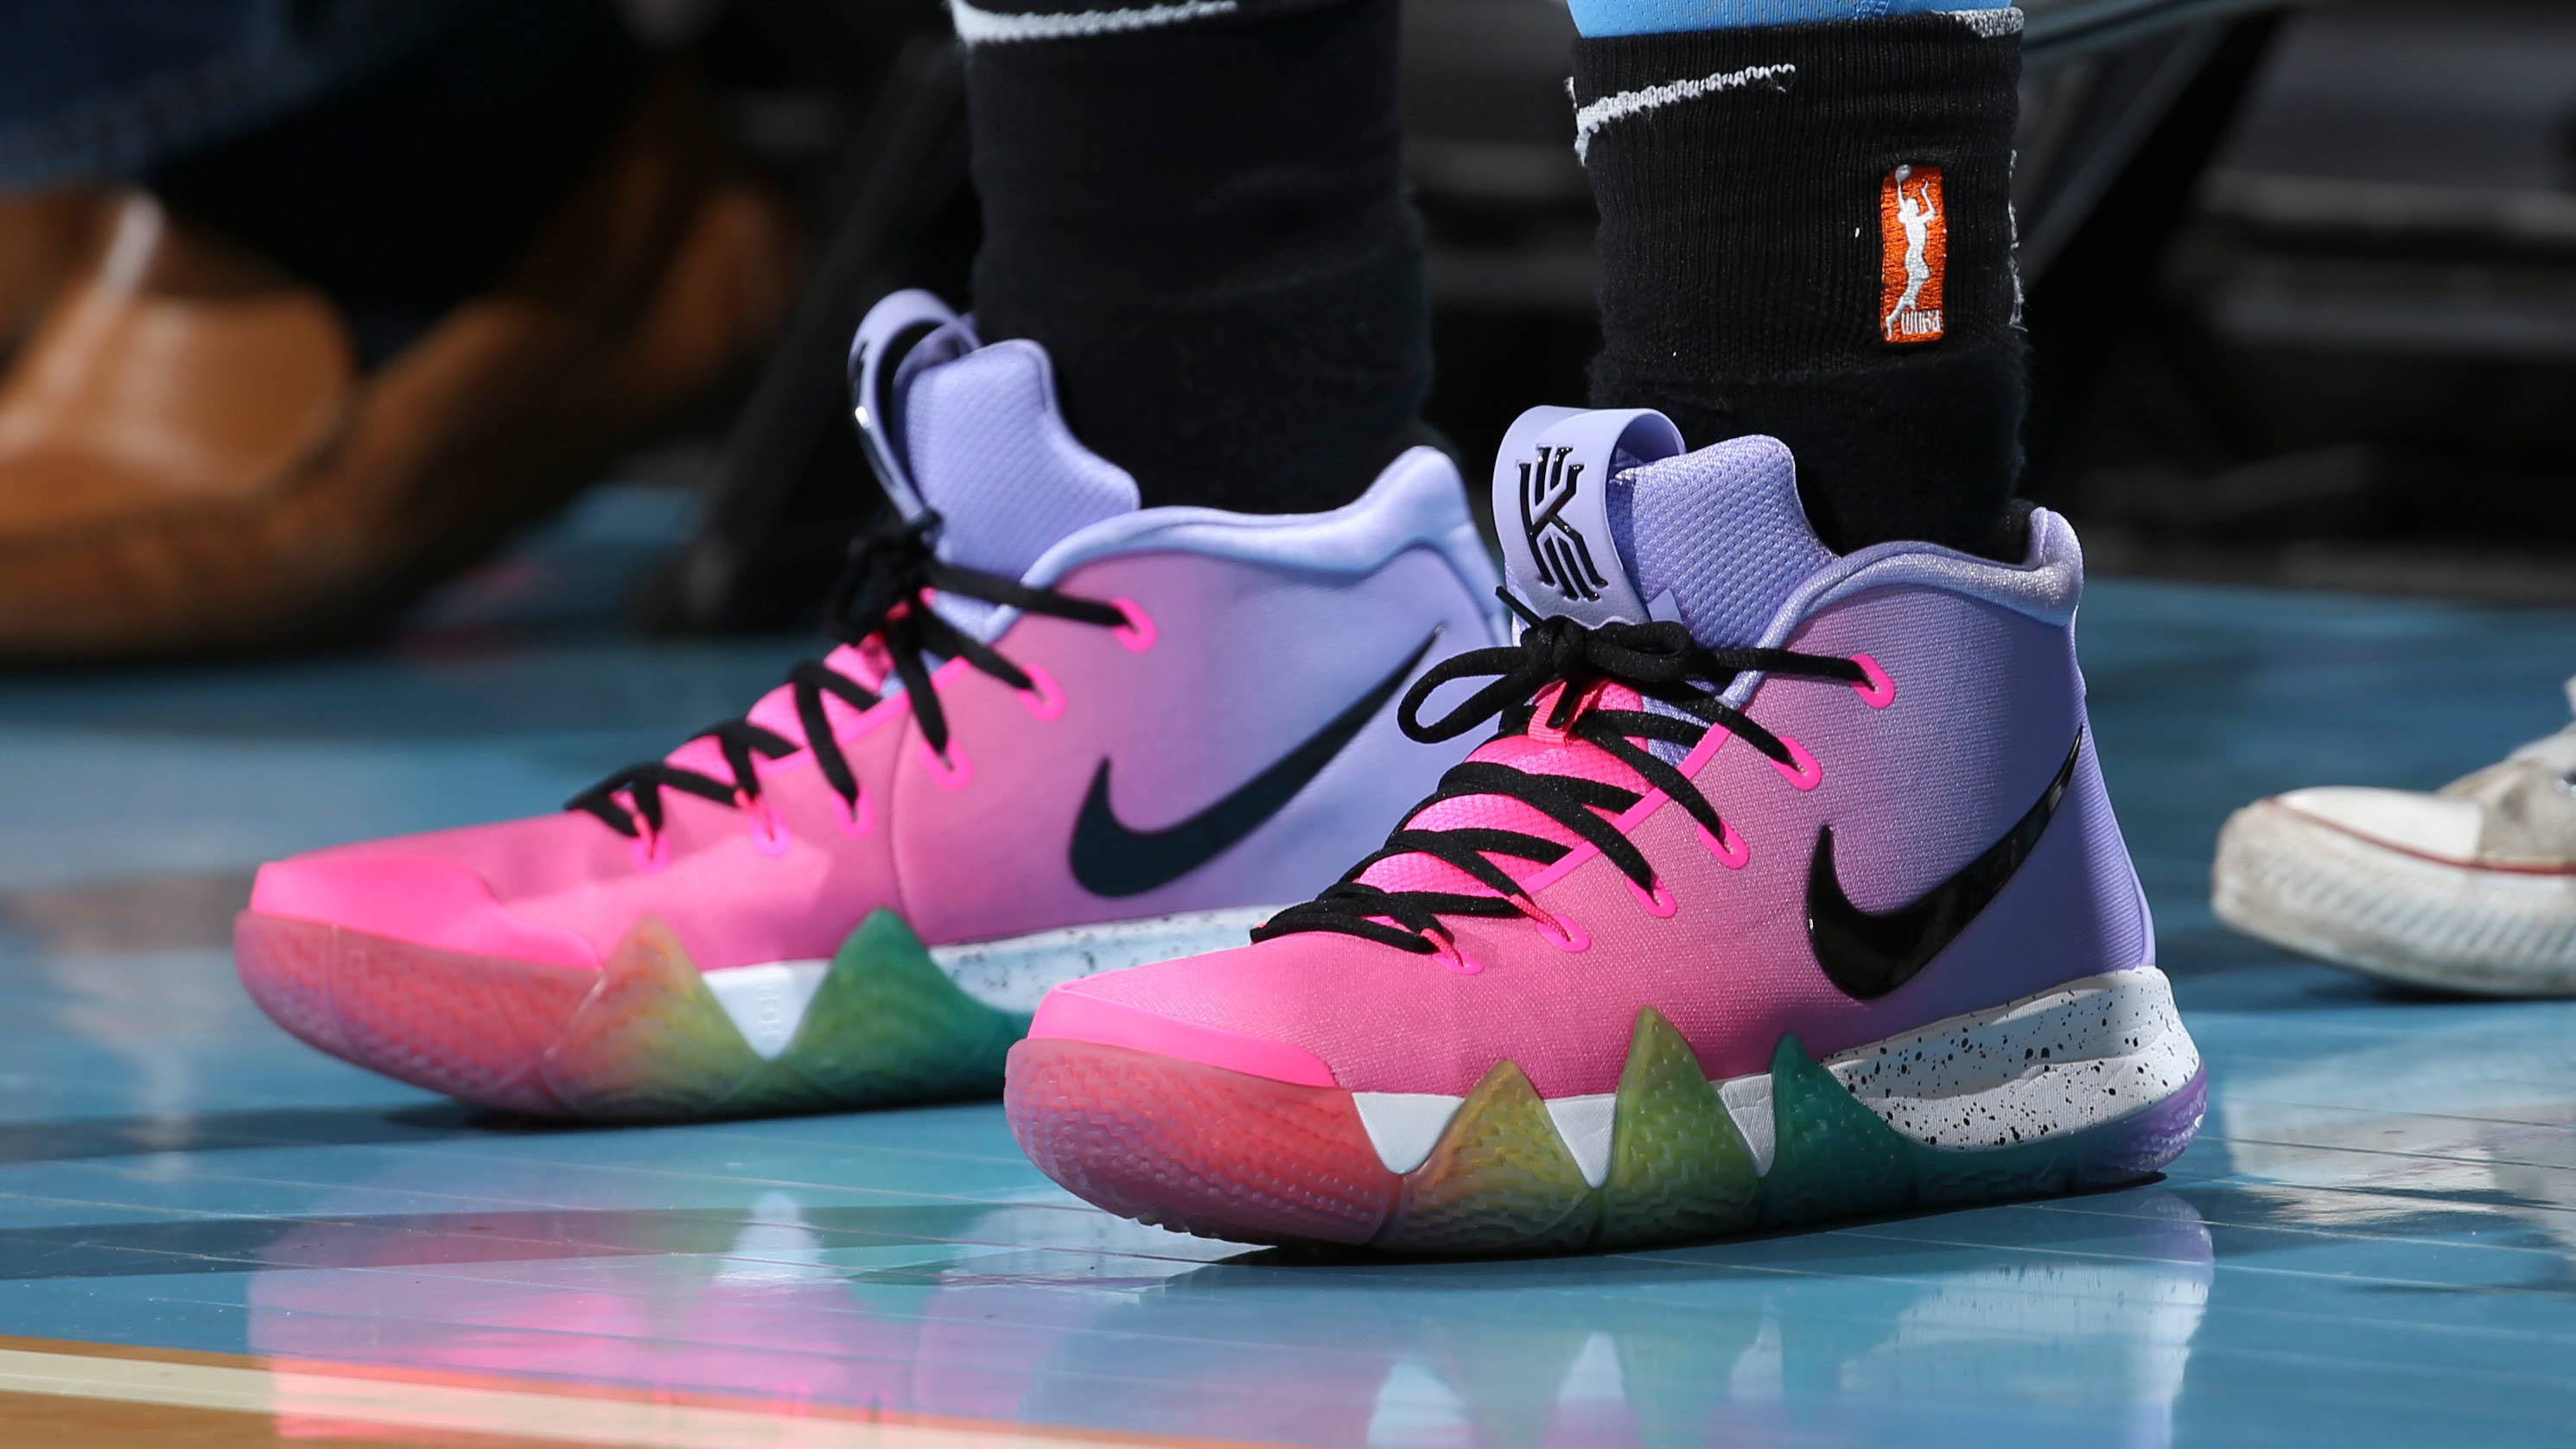 Gabby Williams in the Nike Kyrie 4 'Be True'